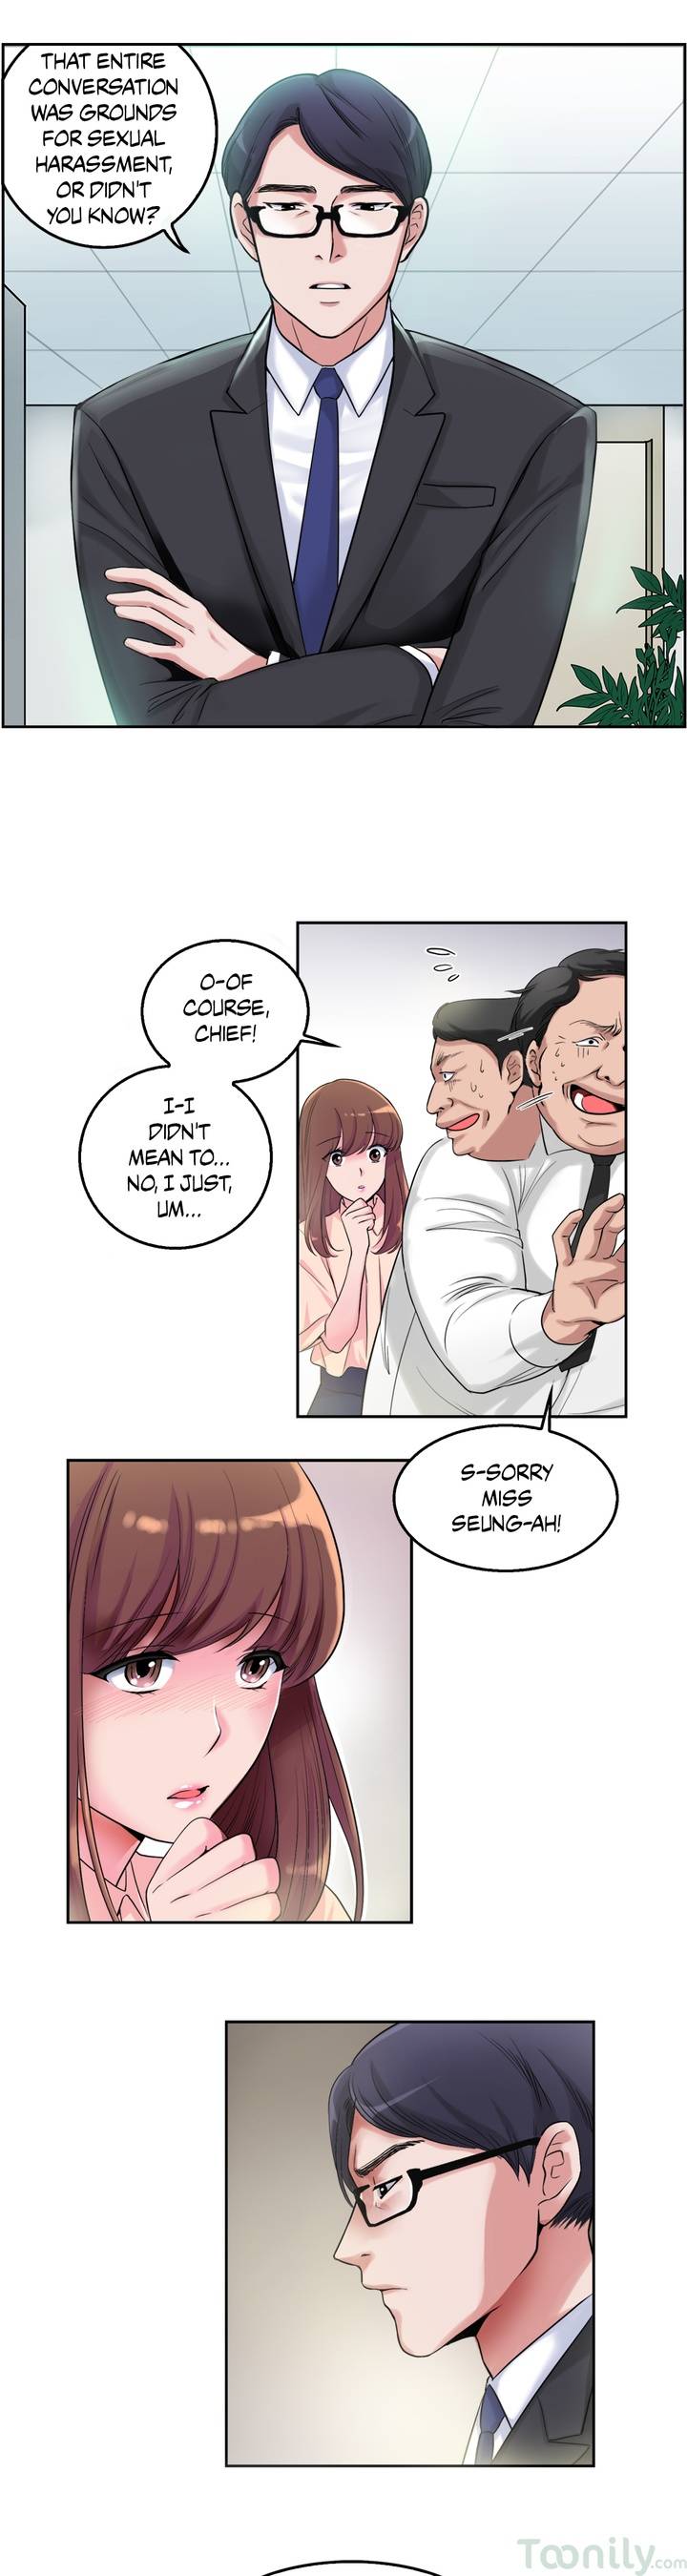 Masters of Masturbation Chapter 1 - Page 7